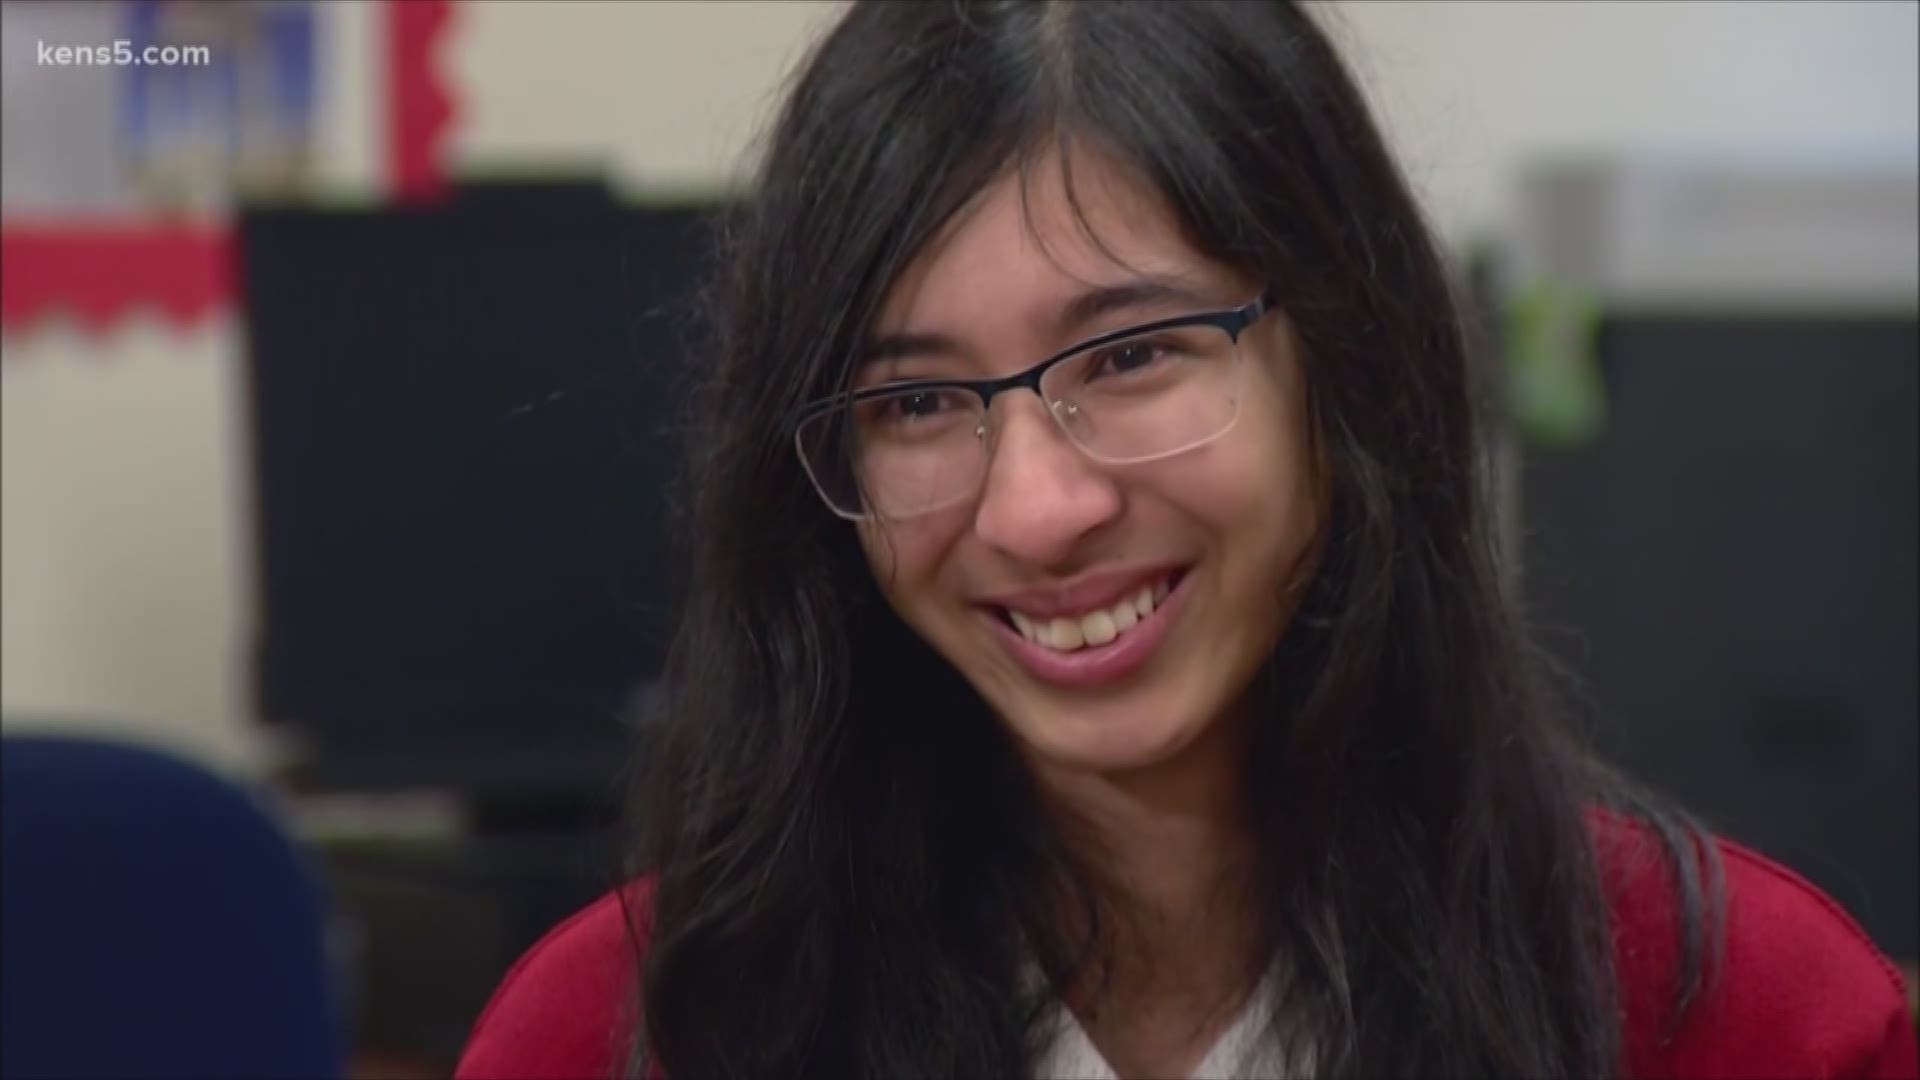 Meet the San Antonio high school student who received a full ride to MIT worth more than $200,000. She is an outstanding scholar on the rise.